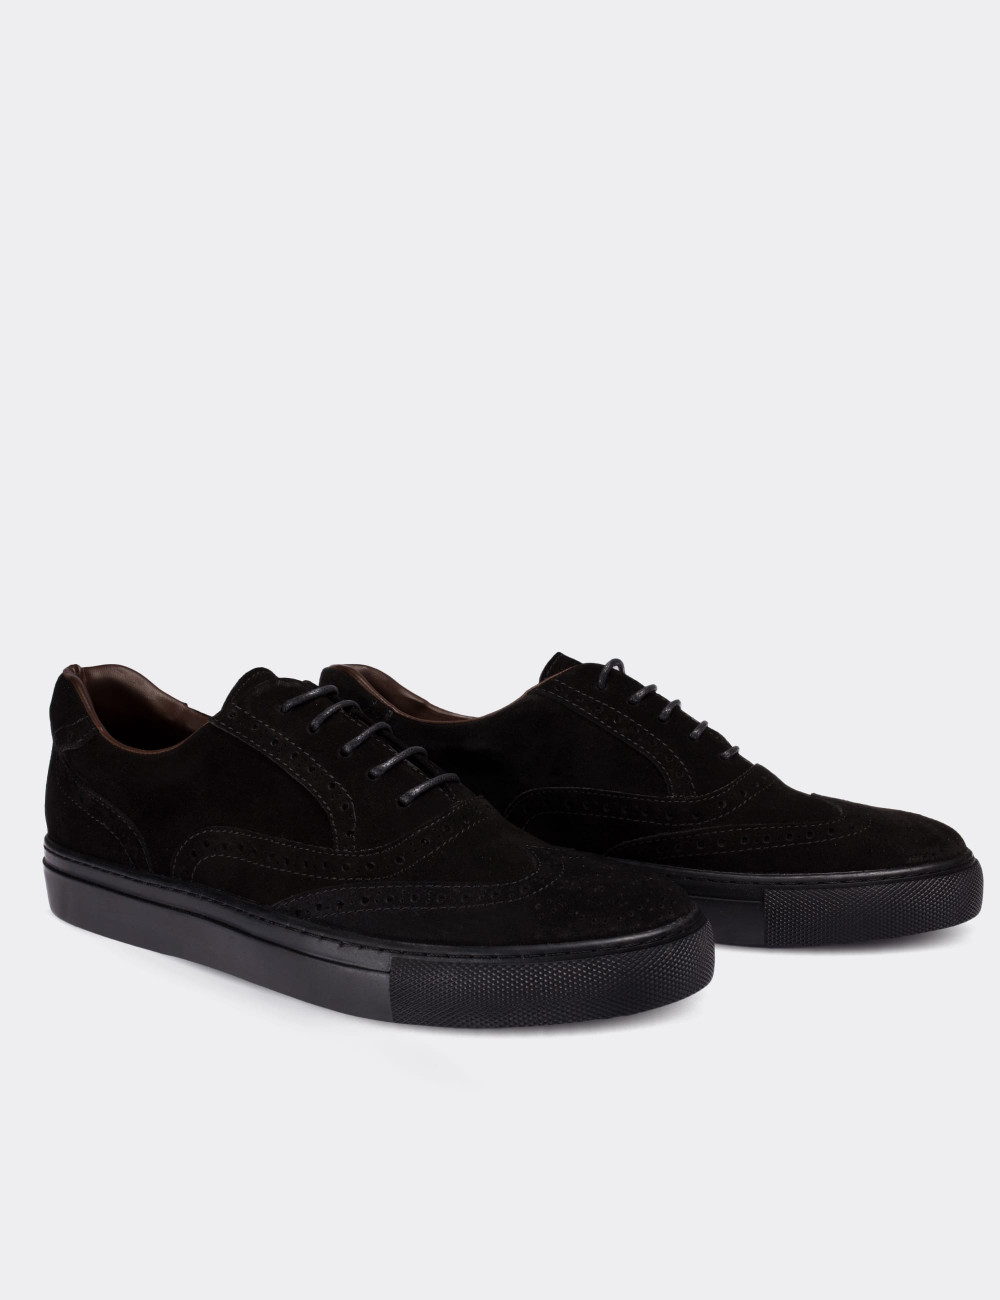 Black Suede Leather Sneakers - 01637MSYHC04